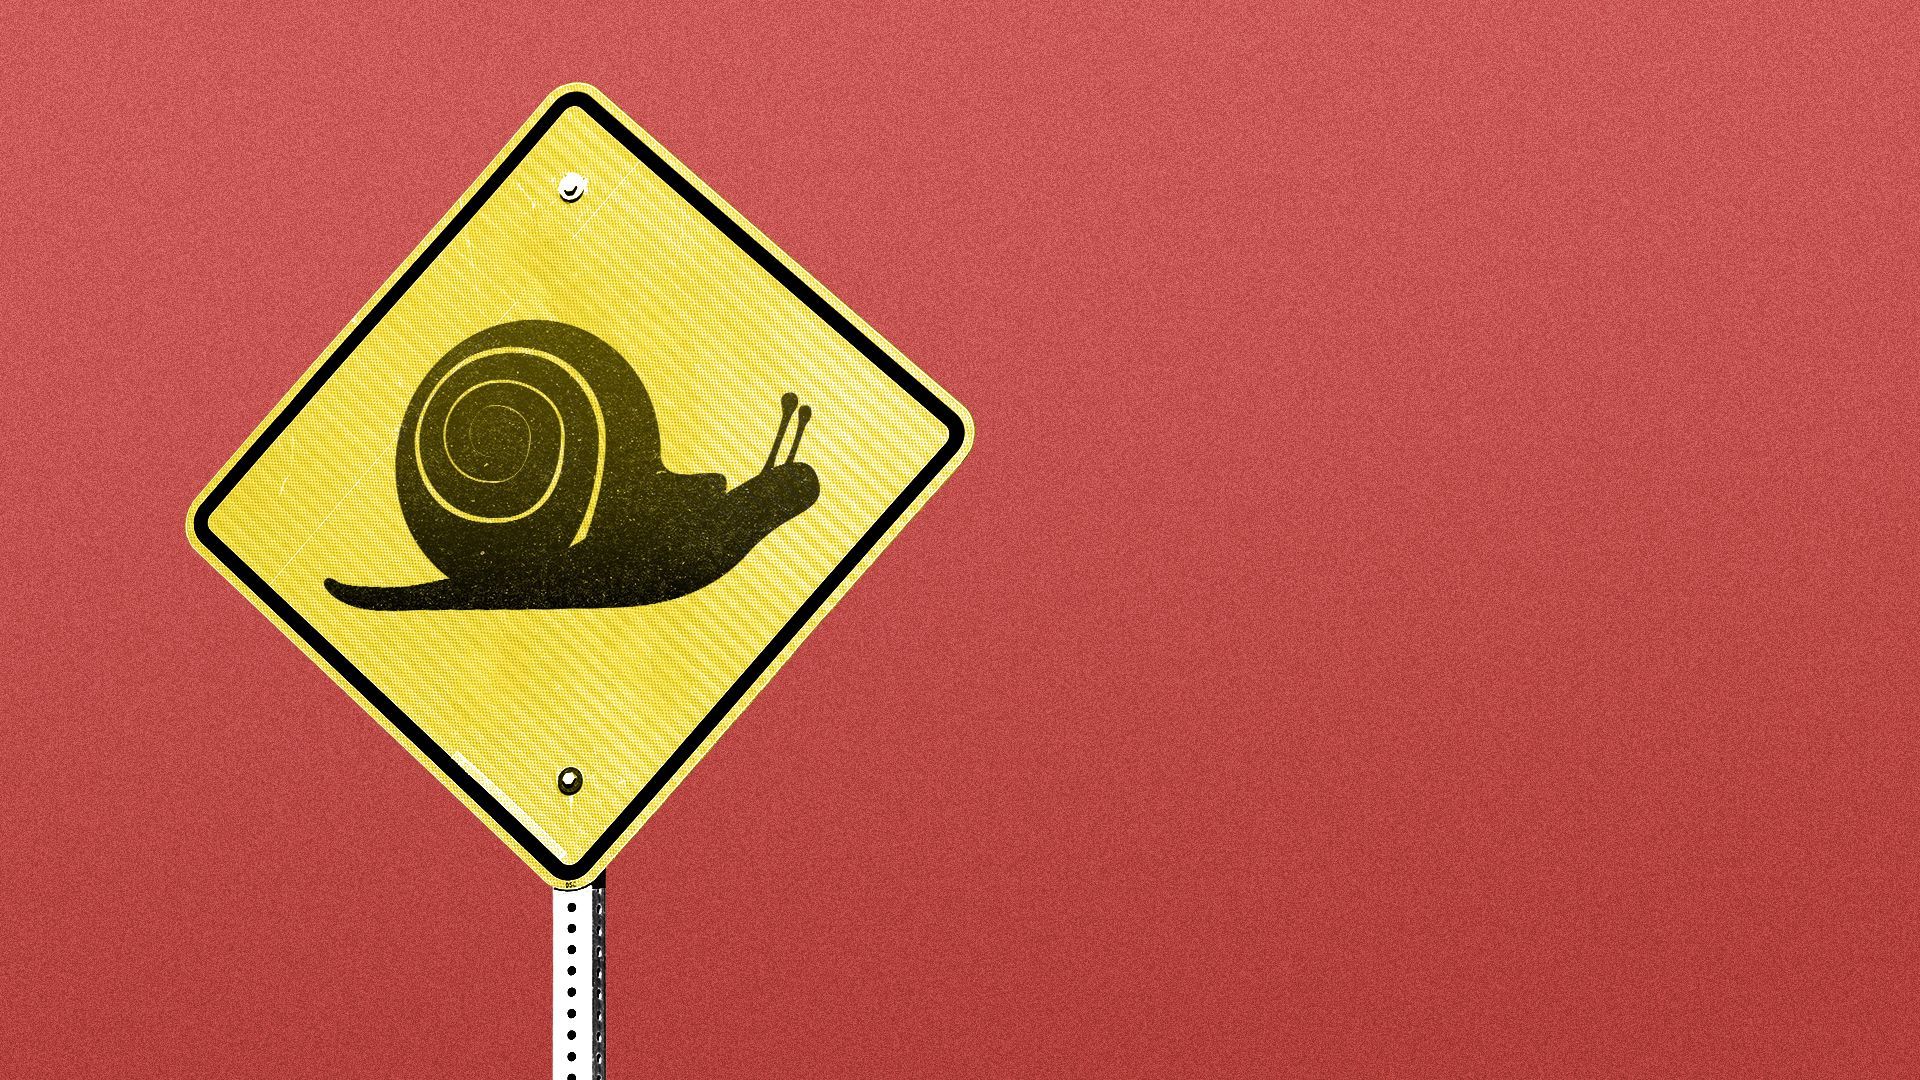 Illustration of a road sign with a snail icon on it.